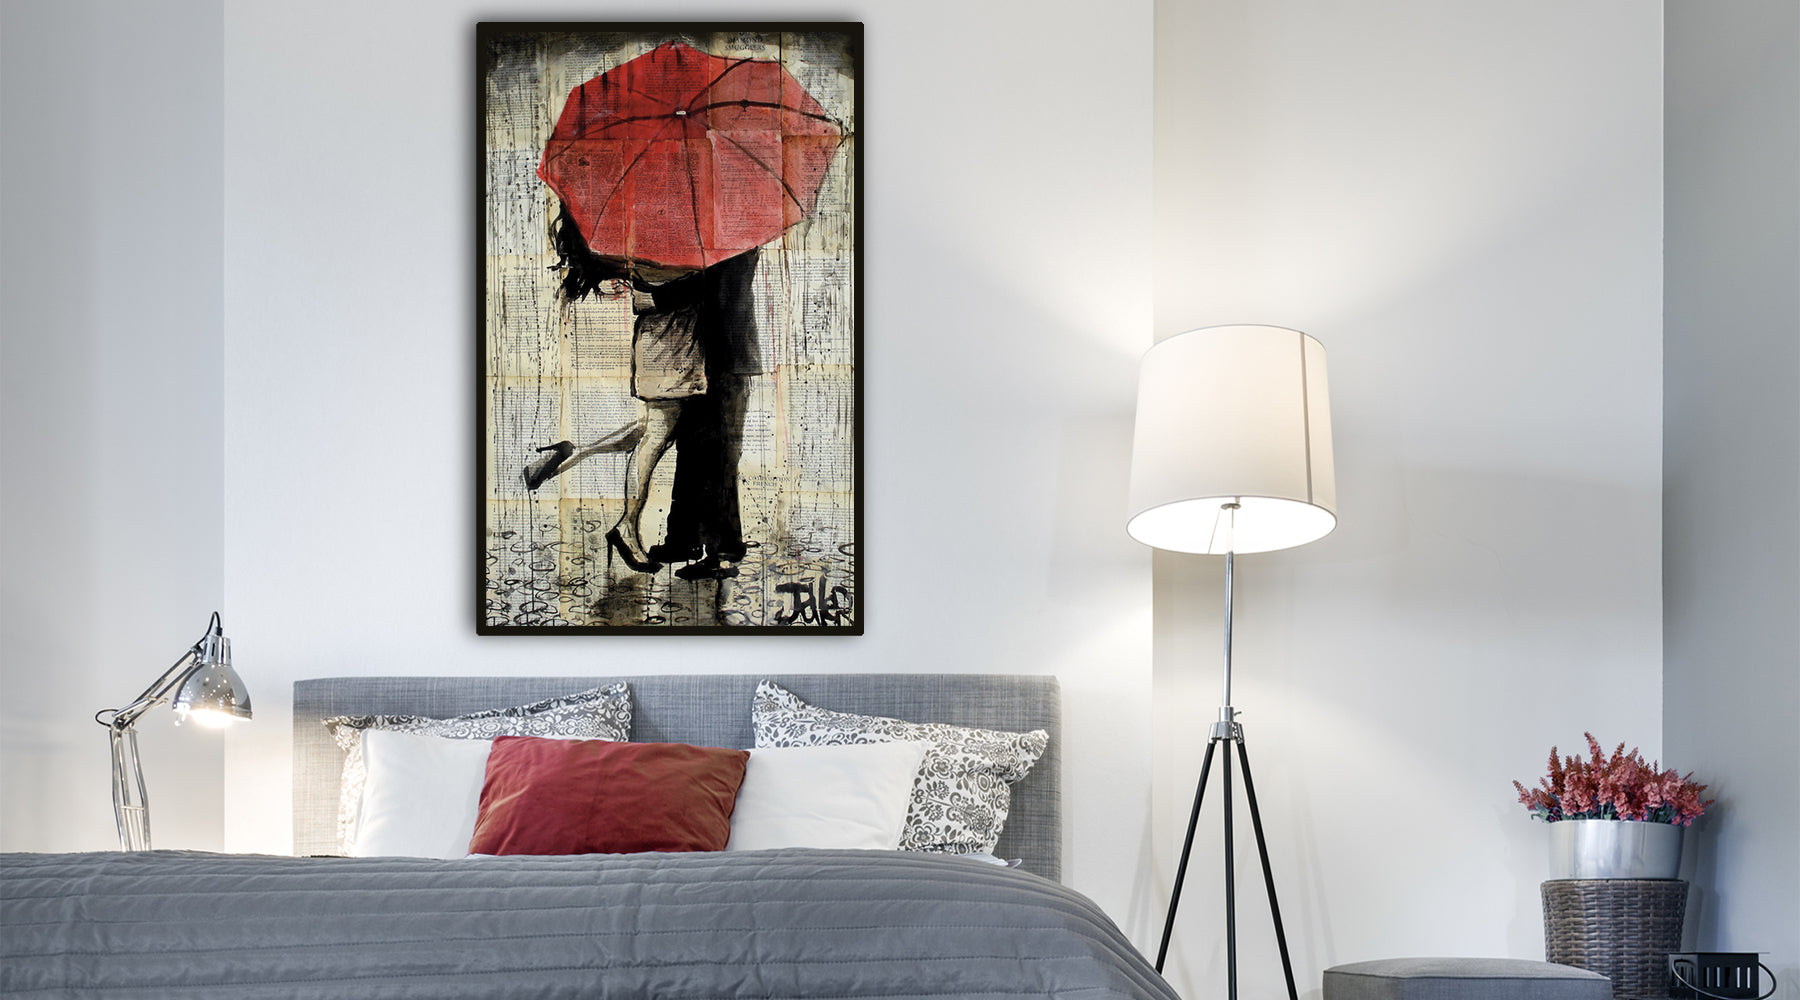 Framed Canvas Wall Art: Wholesale Wall Art for Resellers Only